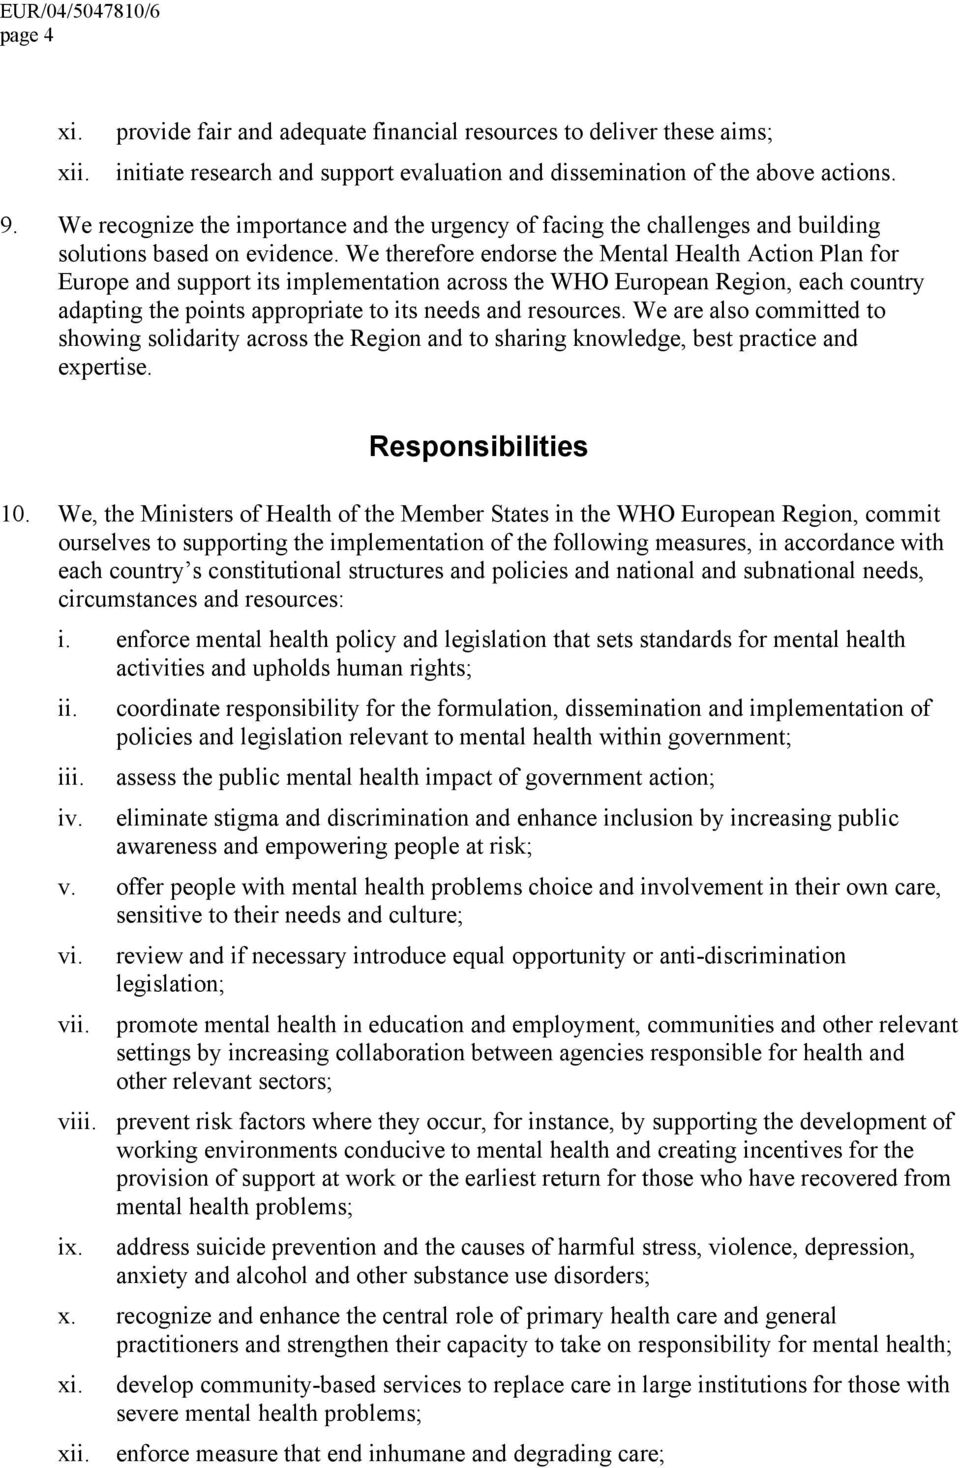 We therefore endorse the Mental Health Action Plan for Europe and support its implementation across the WHO European Region, each country adapting the points appropriate to its needs and resources.